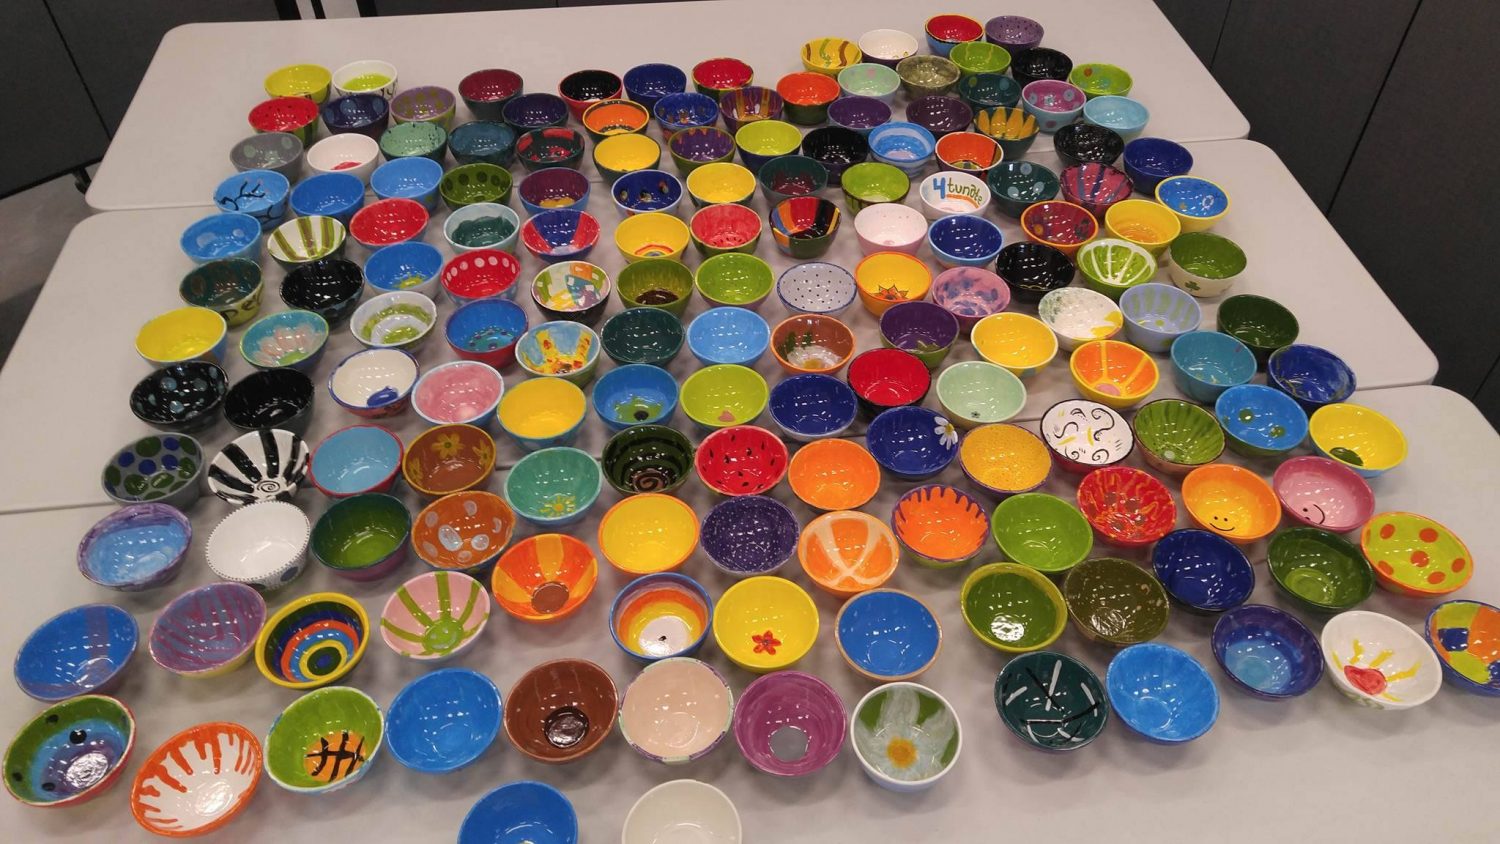 3rd Annual Empty Bowls dinner set for Aug. 27